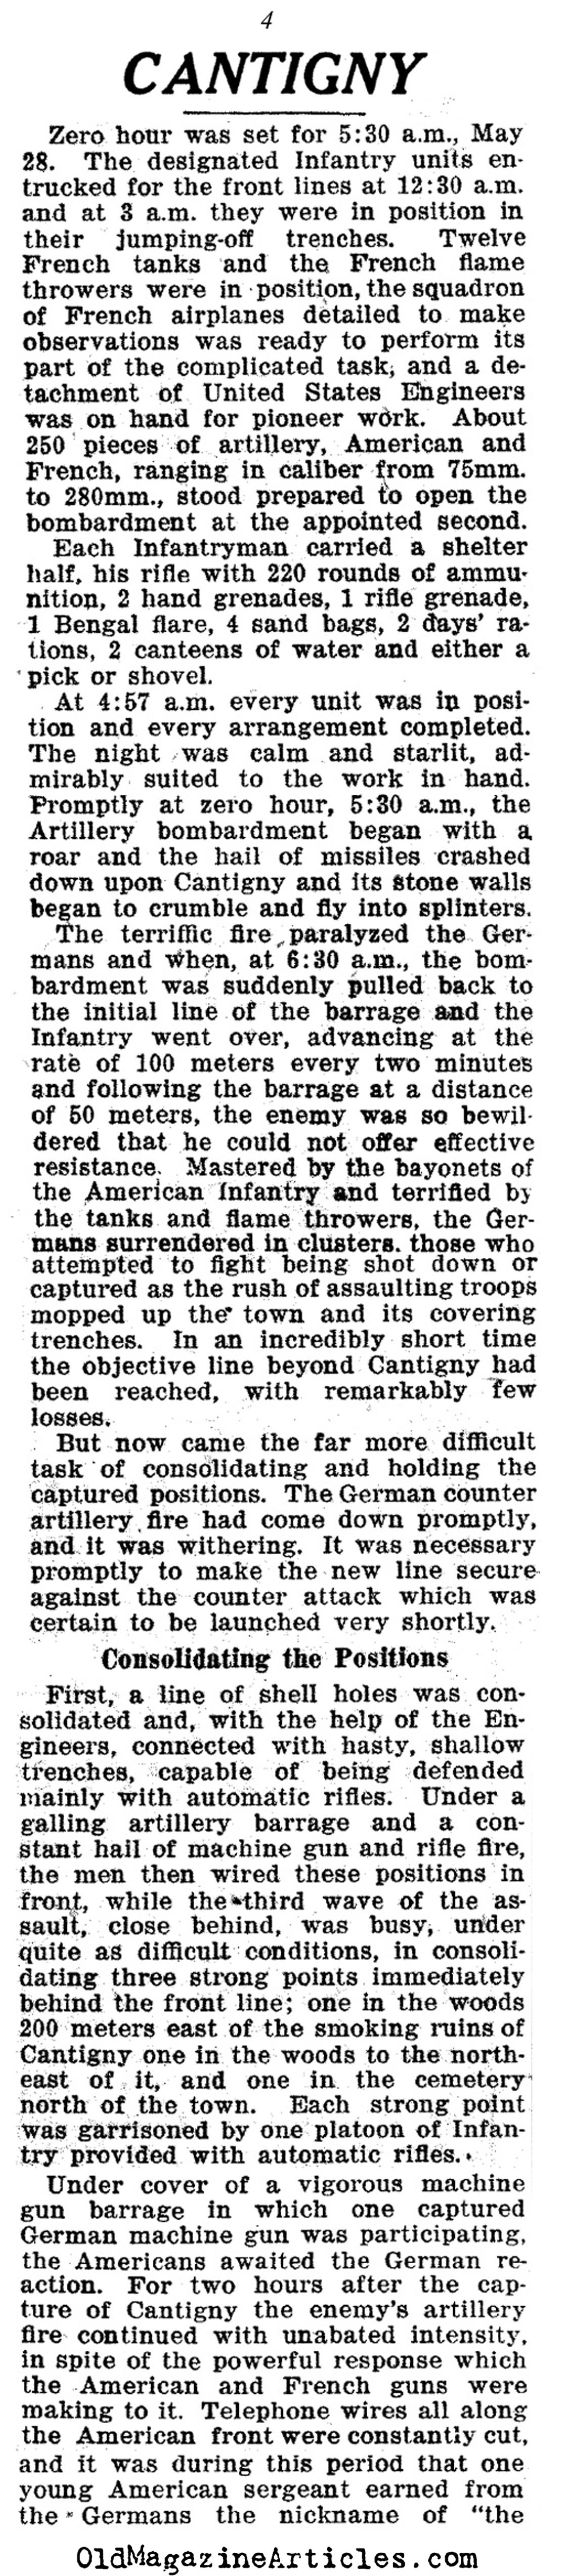 The Battle at Cantigny (The Stars and Stripes, 1918)